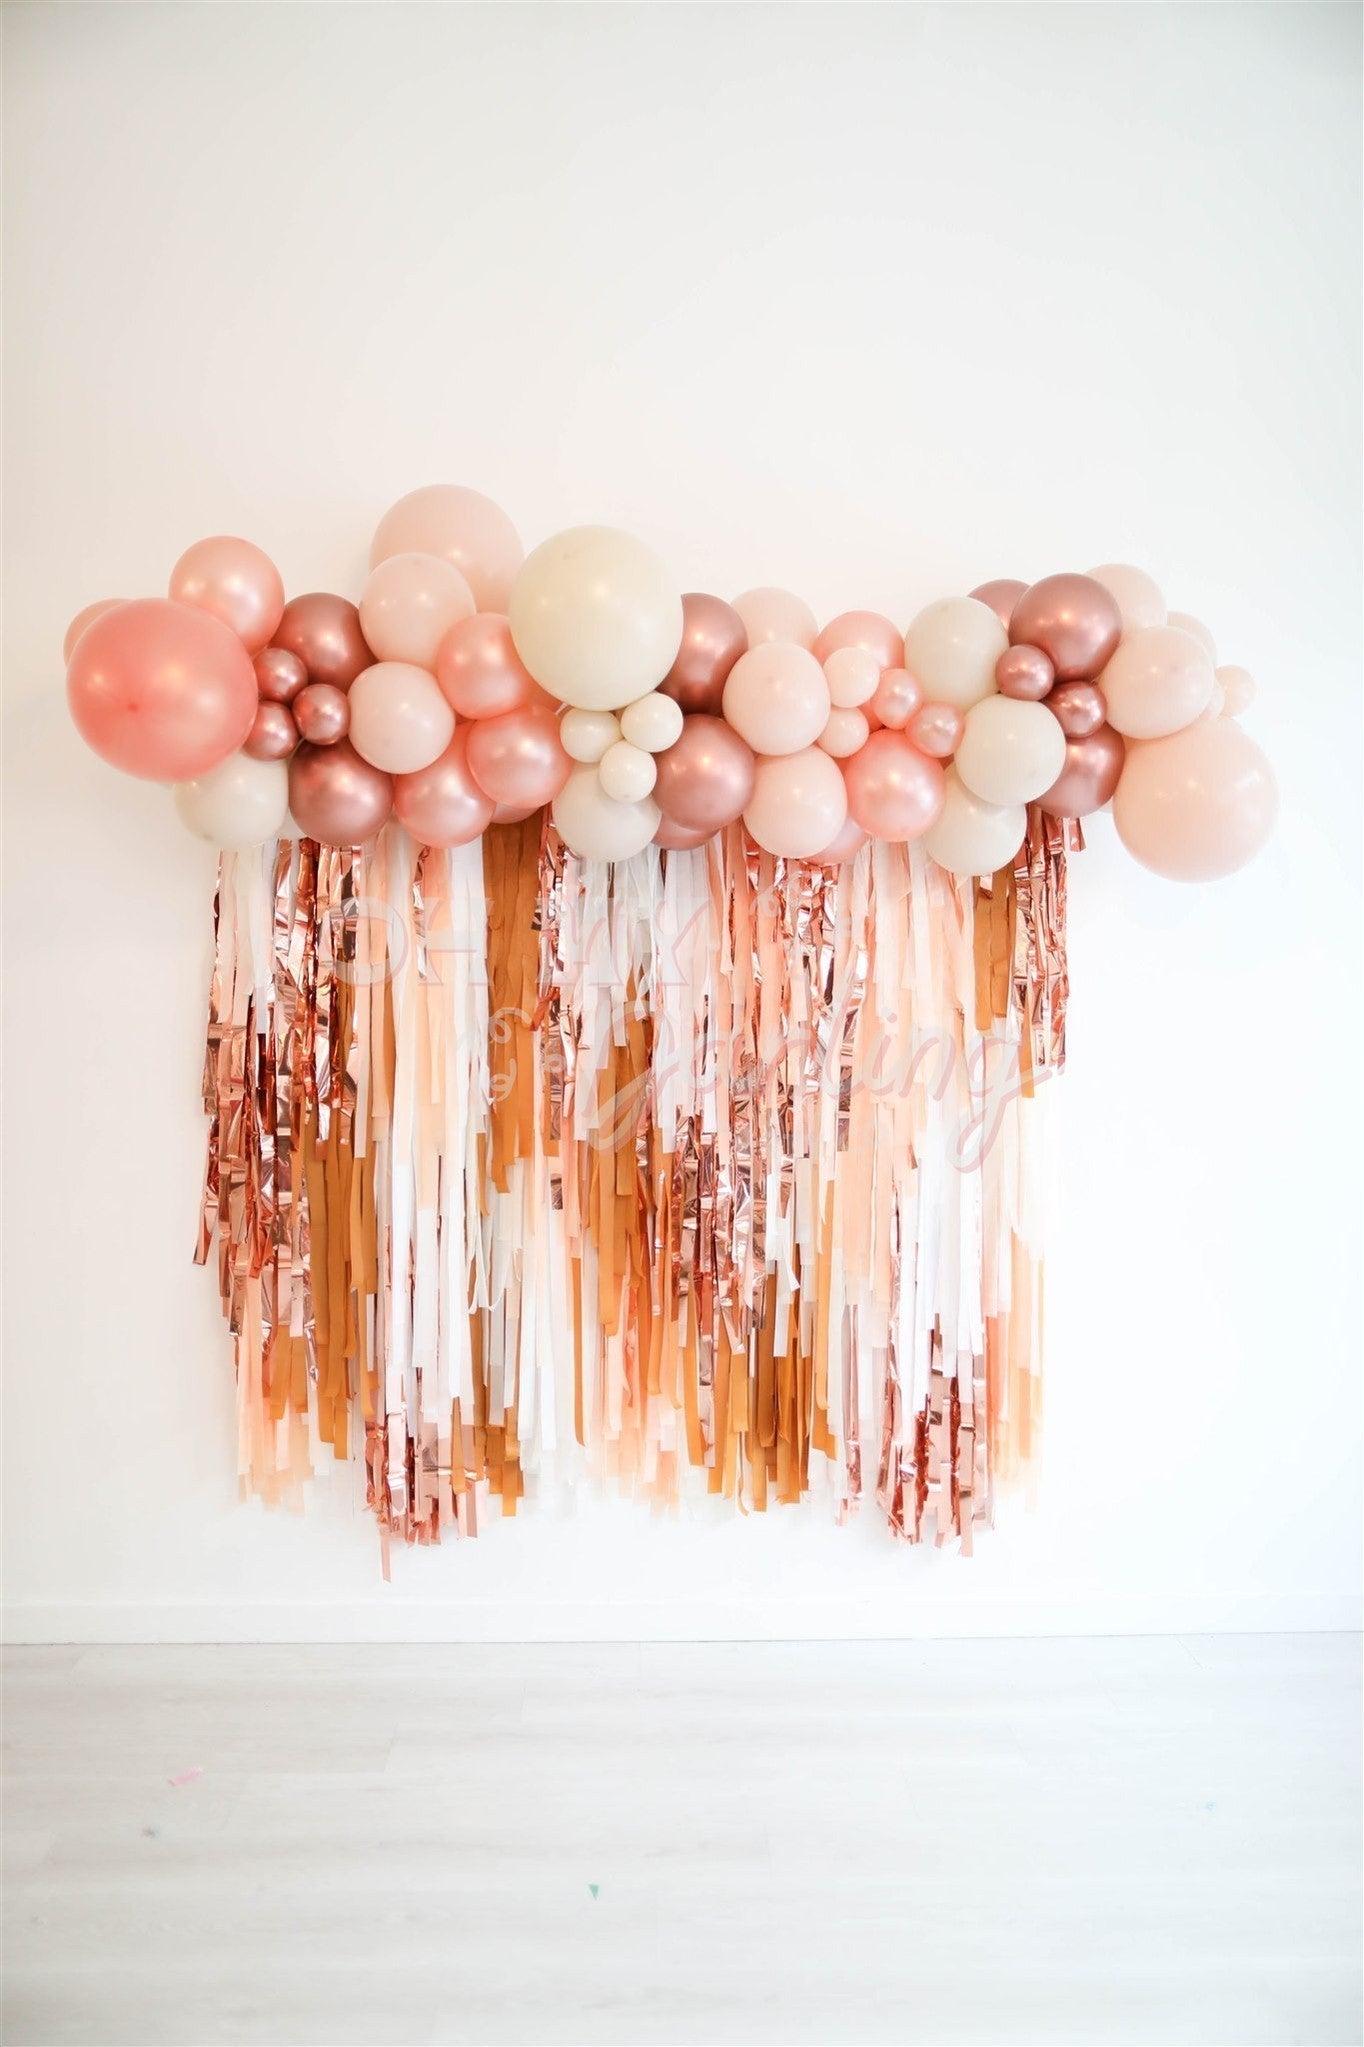 Palm Springs Fringe Backdrop-Fringe Backdrop-Party Decor-Oh My Darling Party Co-Oh My Darling Party Co-30A bachelorette, baby pink, bachelorette, bachelorette party, backdrops for party, balloon garlands, boating bachelorette, boho bachelorette, florida bachelorette, fringe backdrop, fringe garland, Fringe Streamers, got your bash, lake bachelorette, nashty bachelorette, neutral bachelorette, OMDPC, palm springs bachelorette, pampas bachelorette, party backdrops, peach, peachy, Pink, pink and orange bachelo